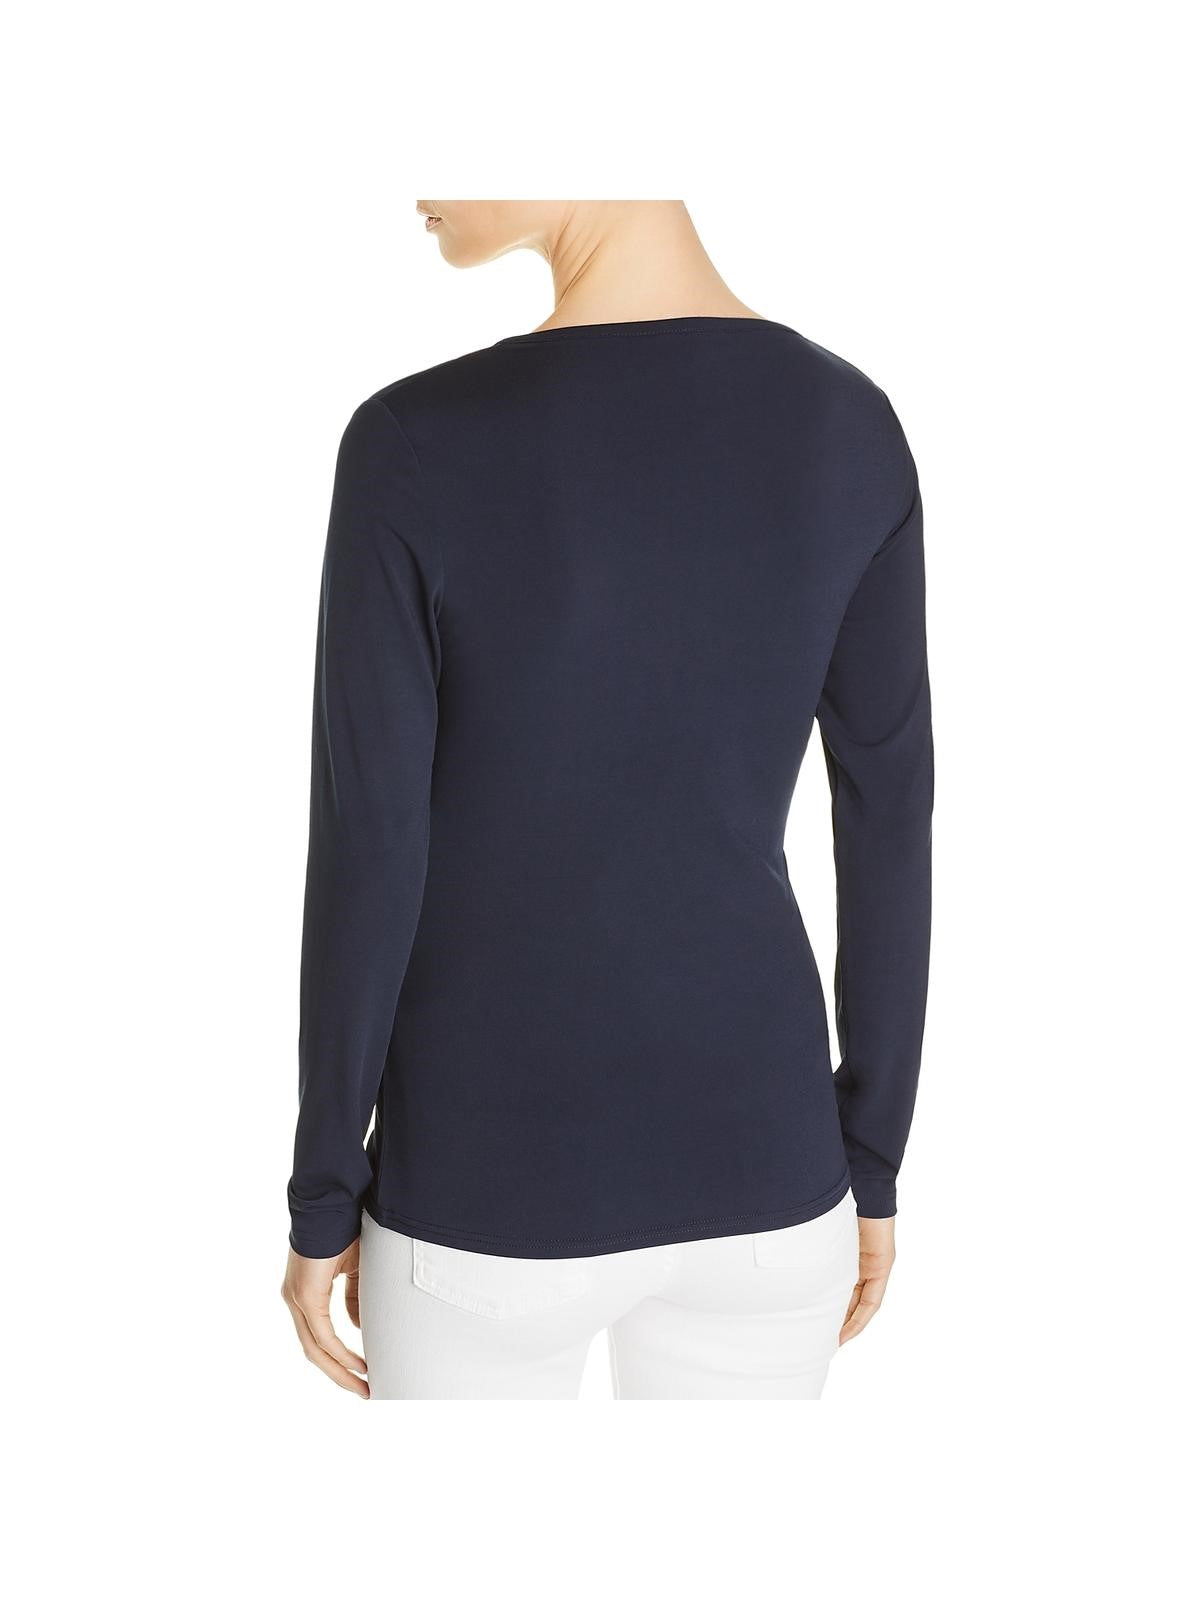 Le Gali Womens Knit Top Navy Side-Ruched Long Sleeve XXL